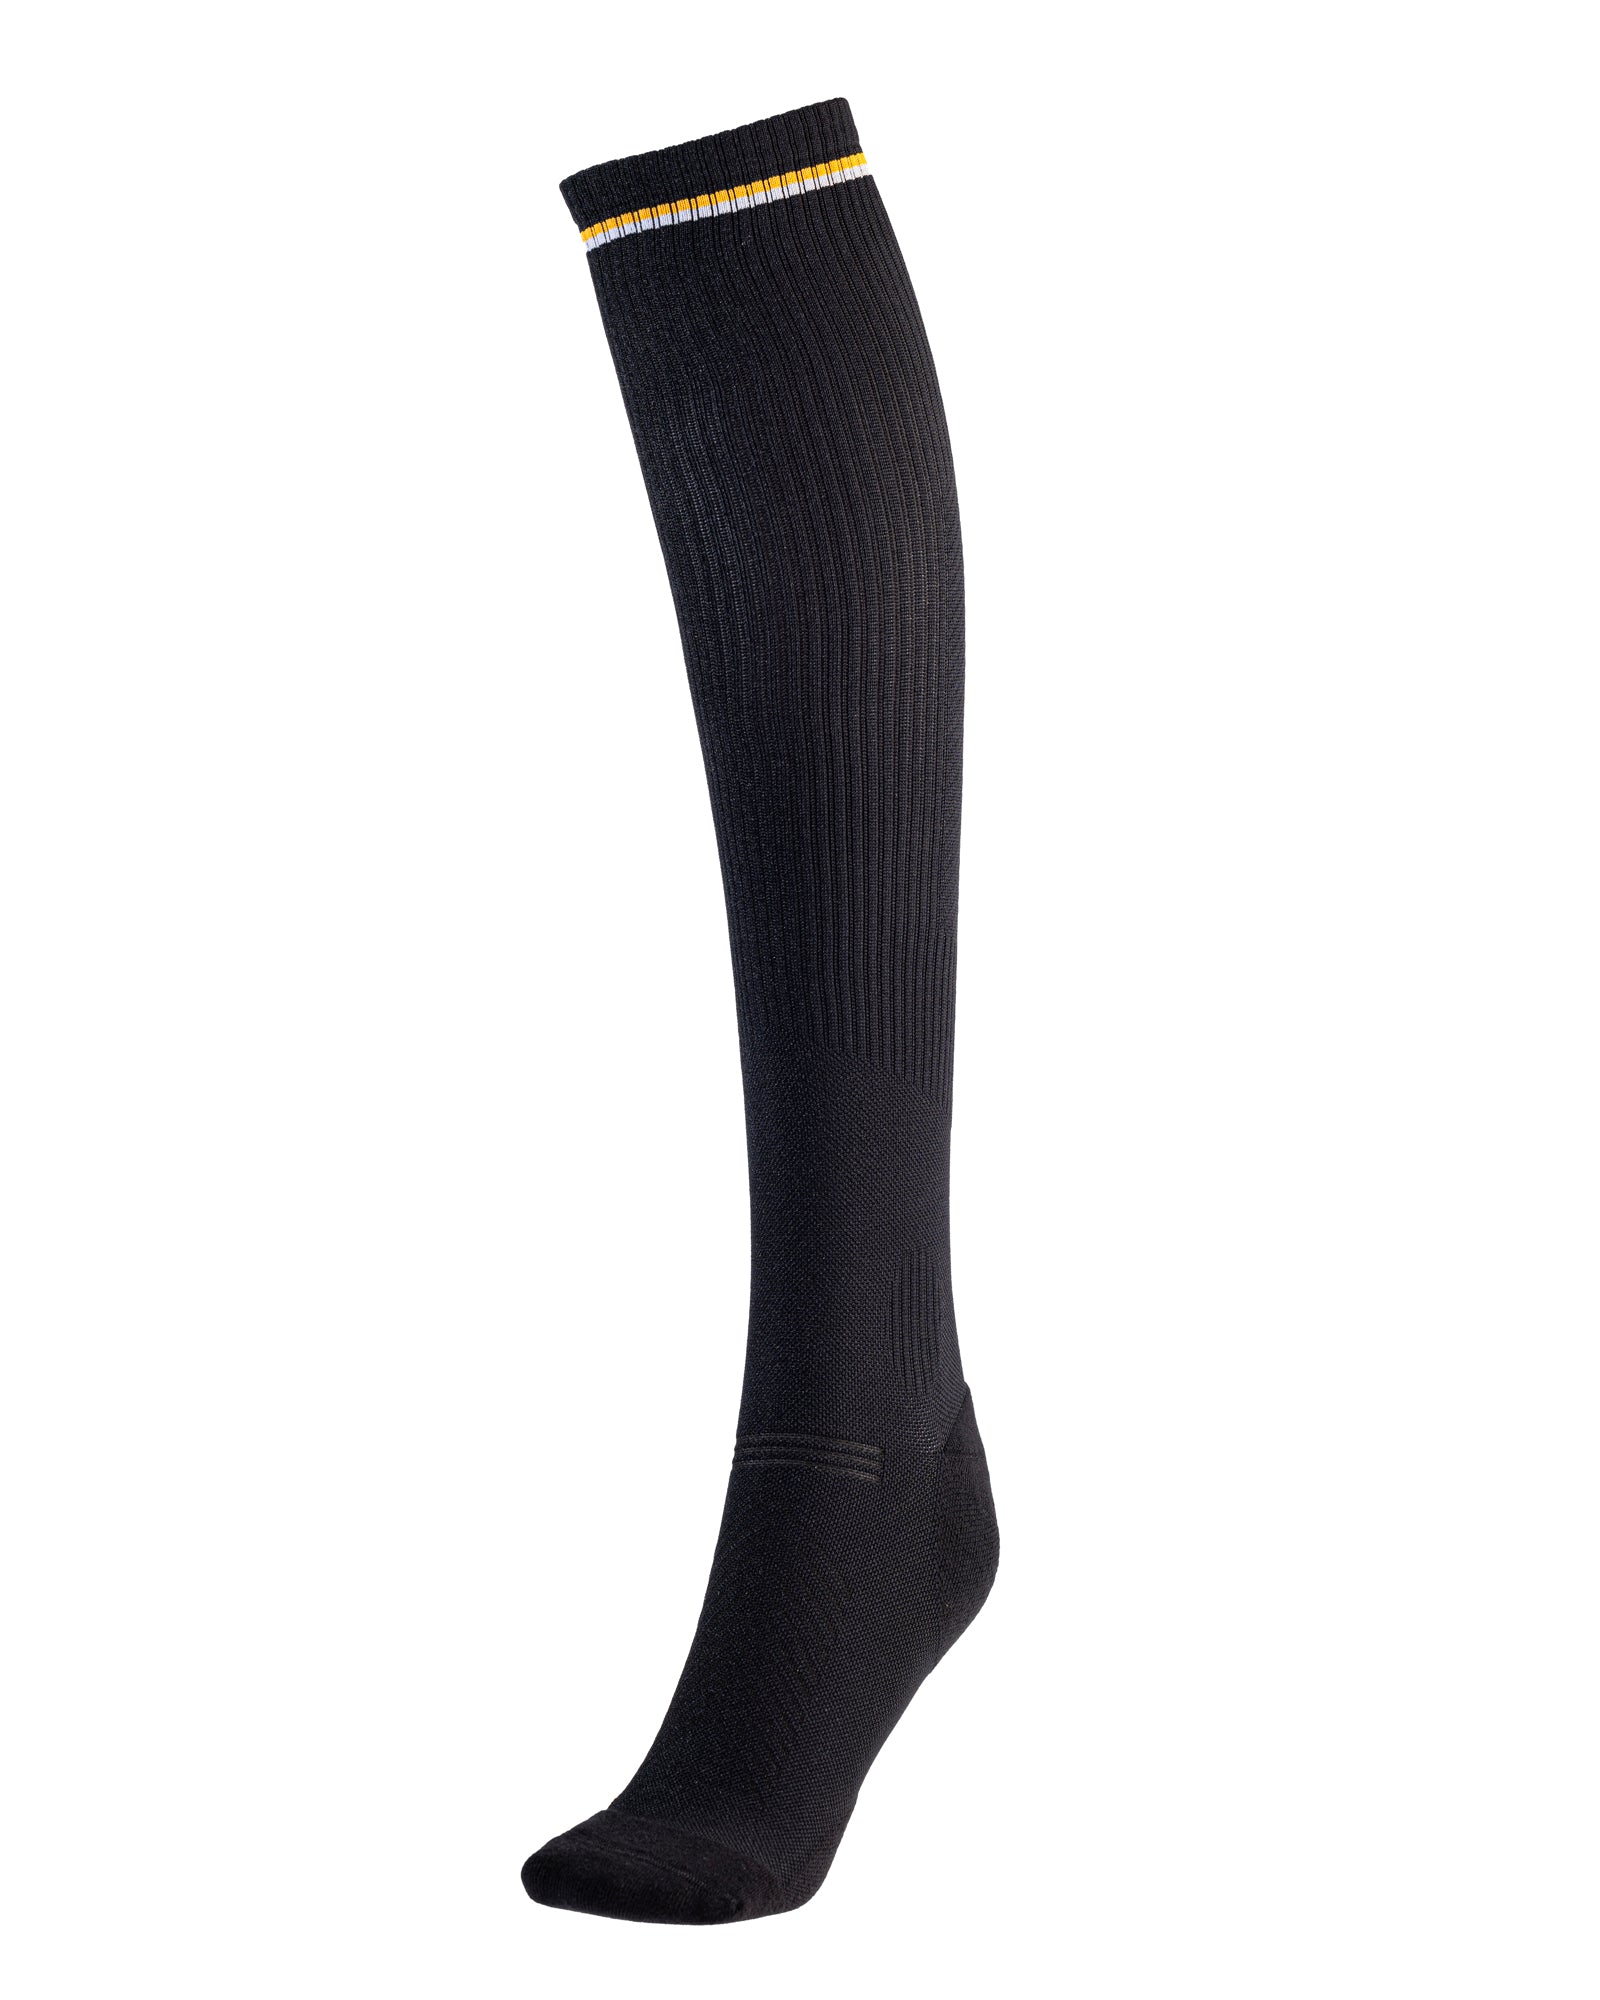 How to Pick the Best Compression Socks for Running. Nike CH